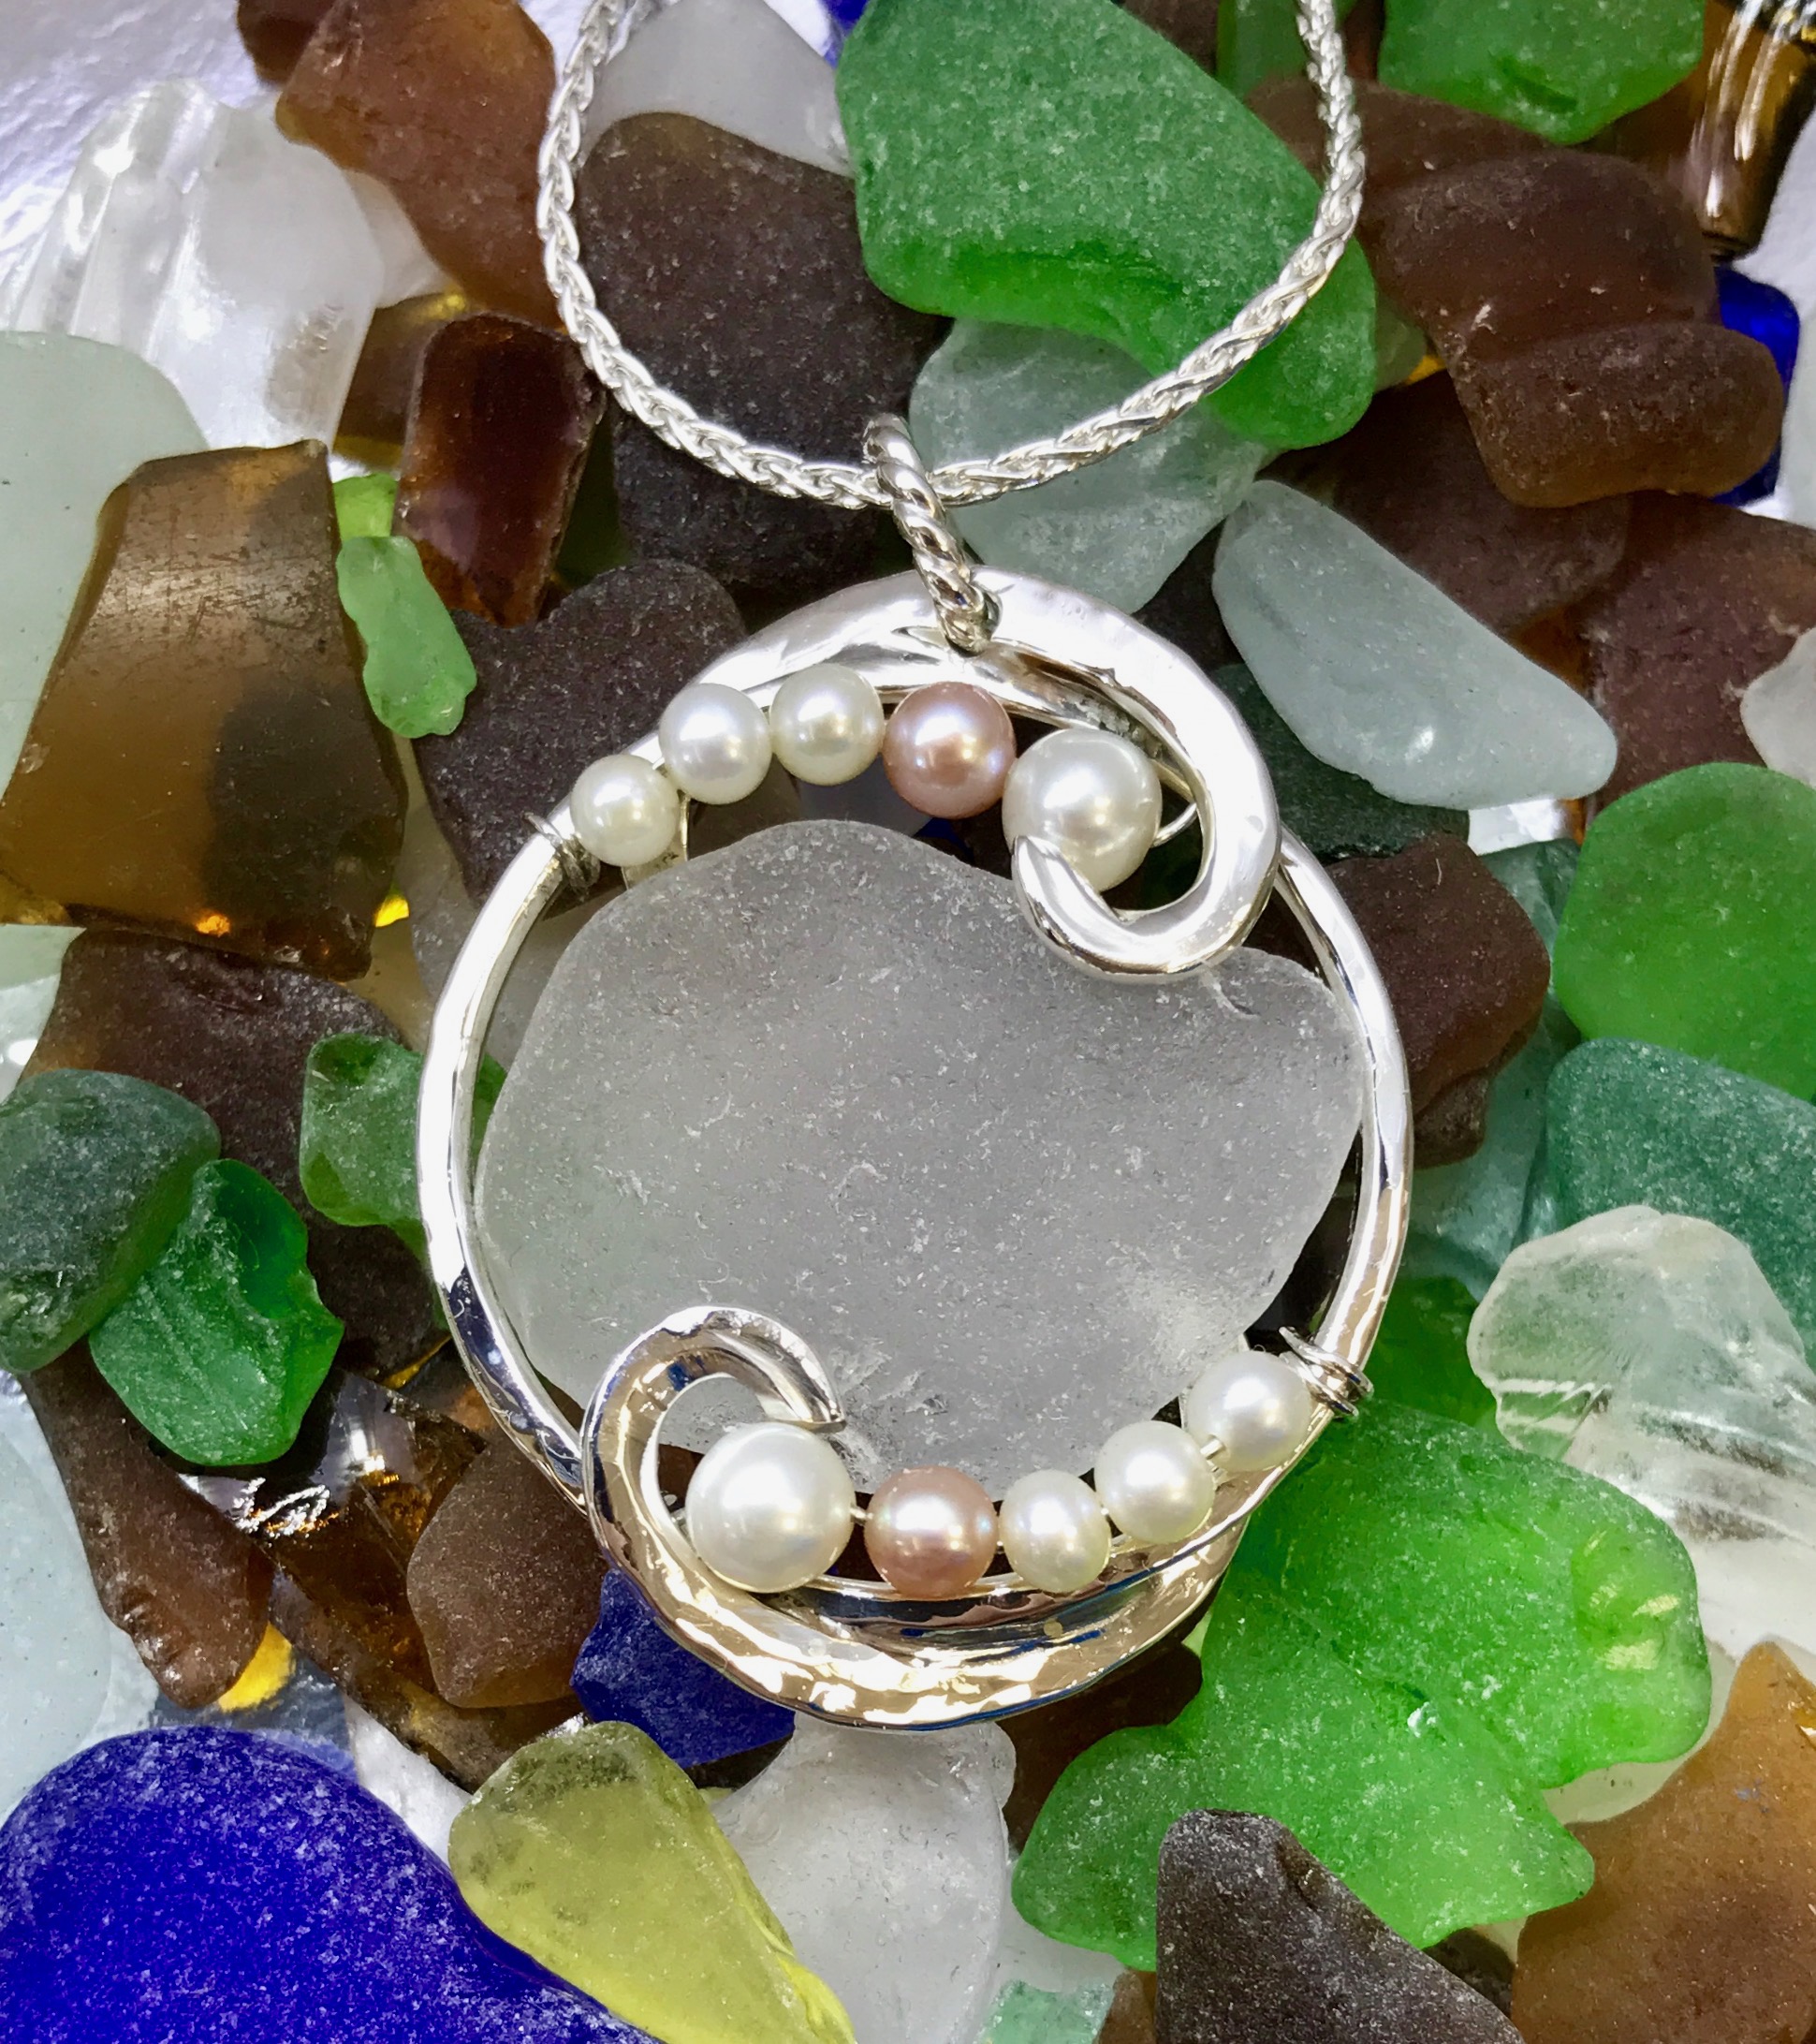 Custom Designed Sterling Silver Plymouth Beach Glass Pendant With Graduating Colored Cultured Akoya Pearls